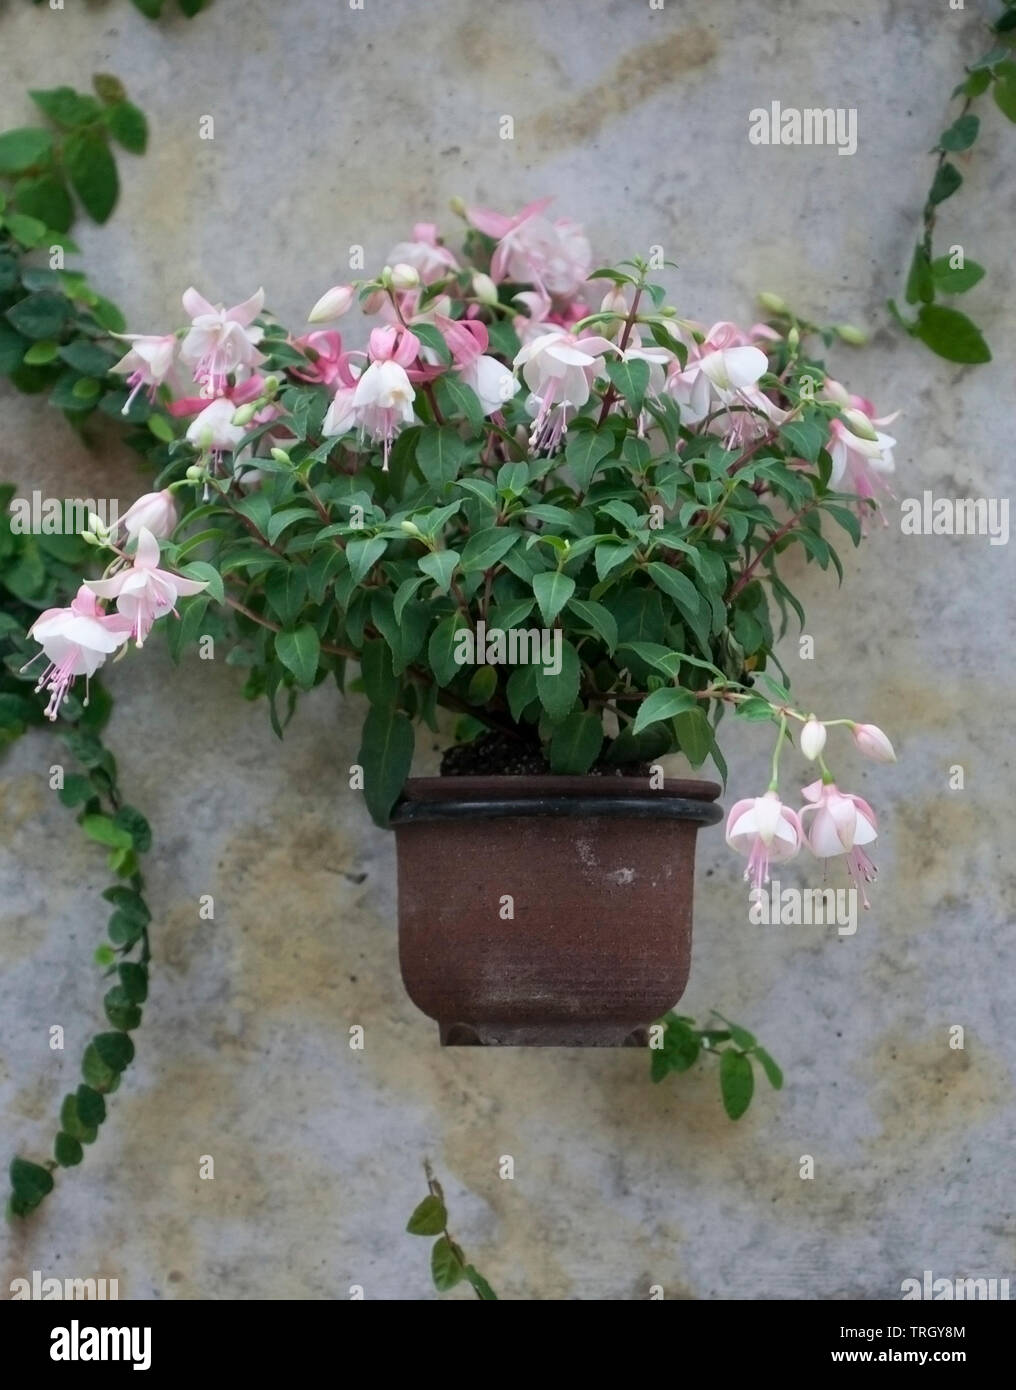 pink fuchsia flowers blooming in a hanging pot against a rustic wall Stock Photo